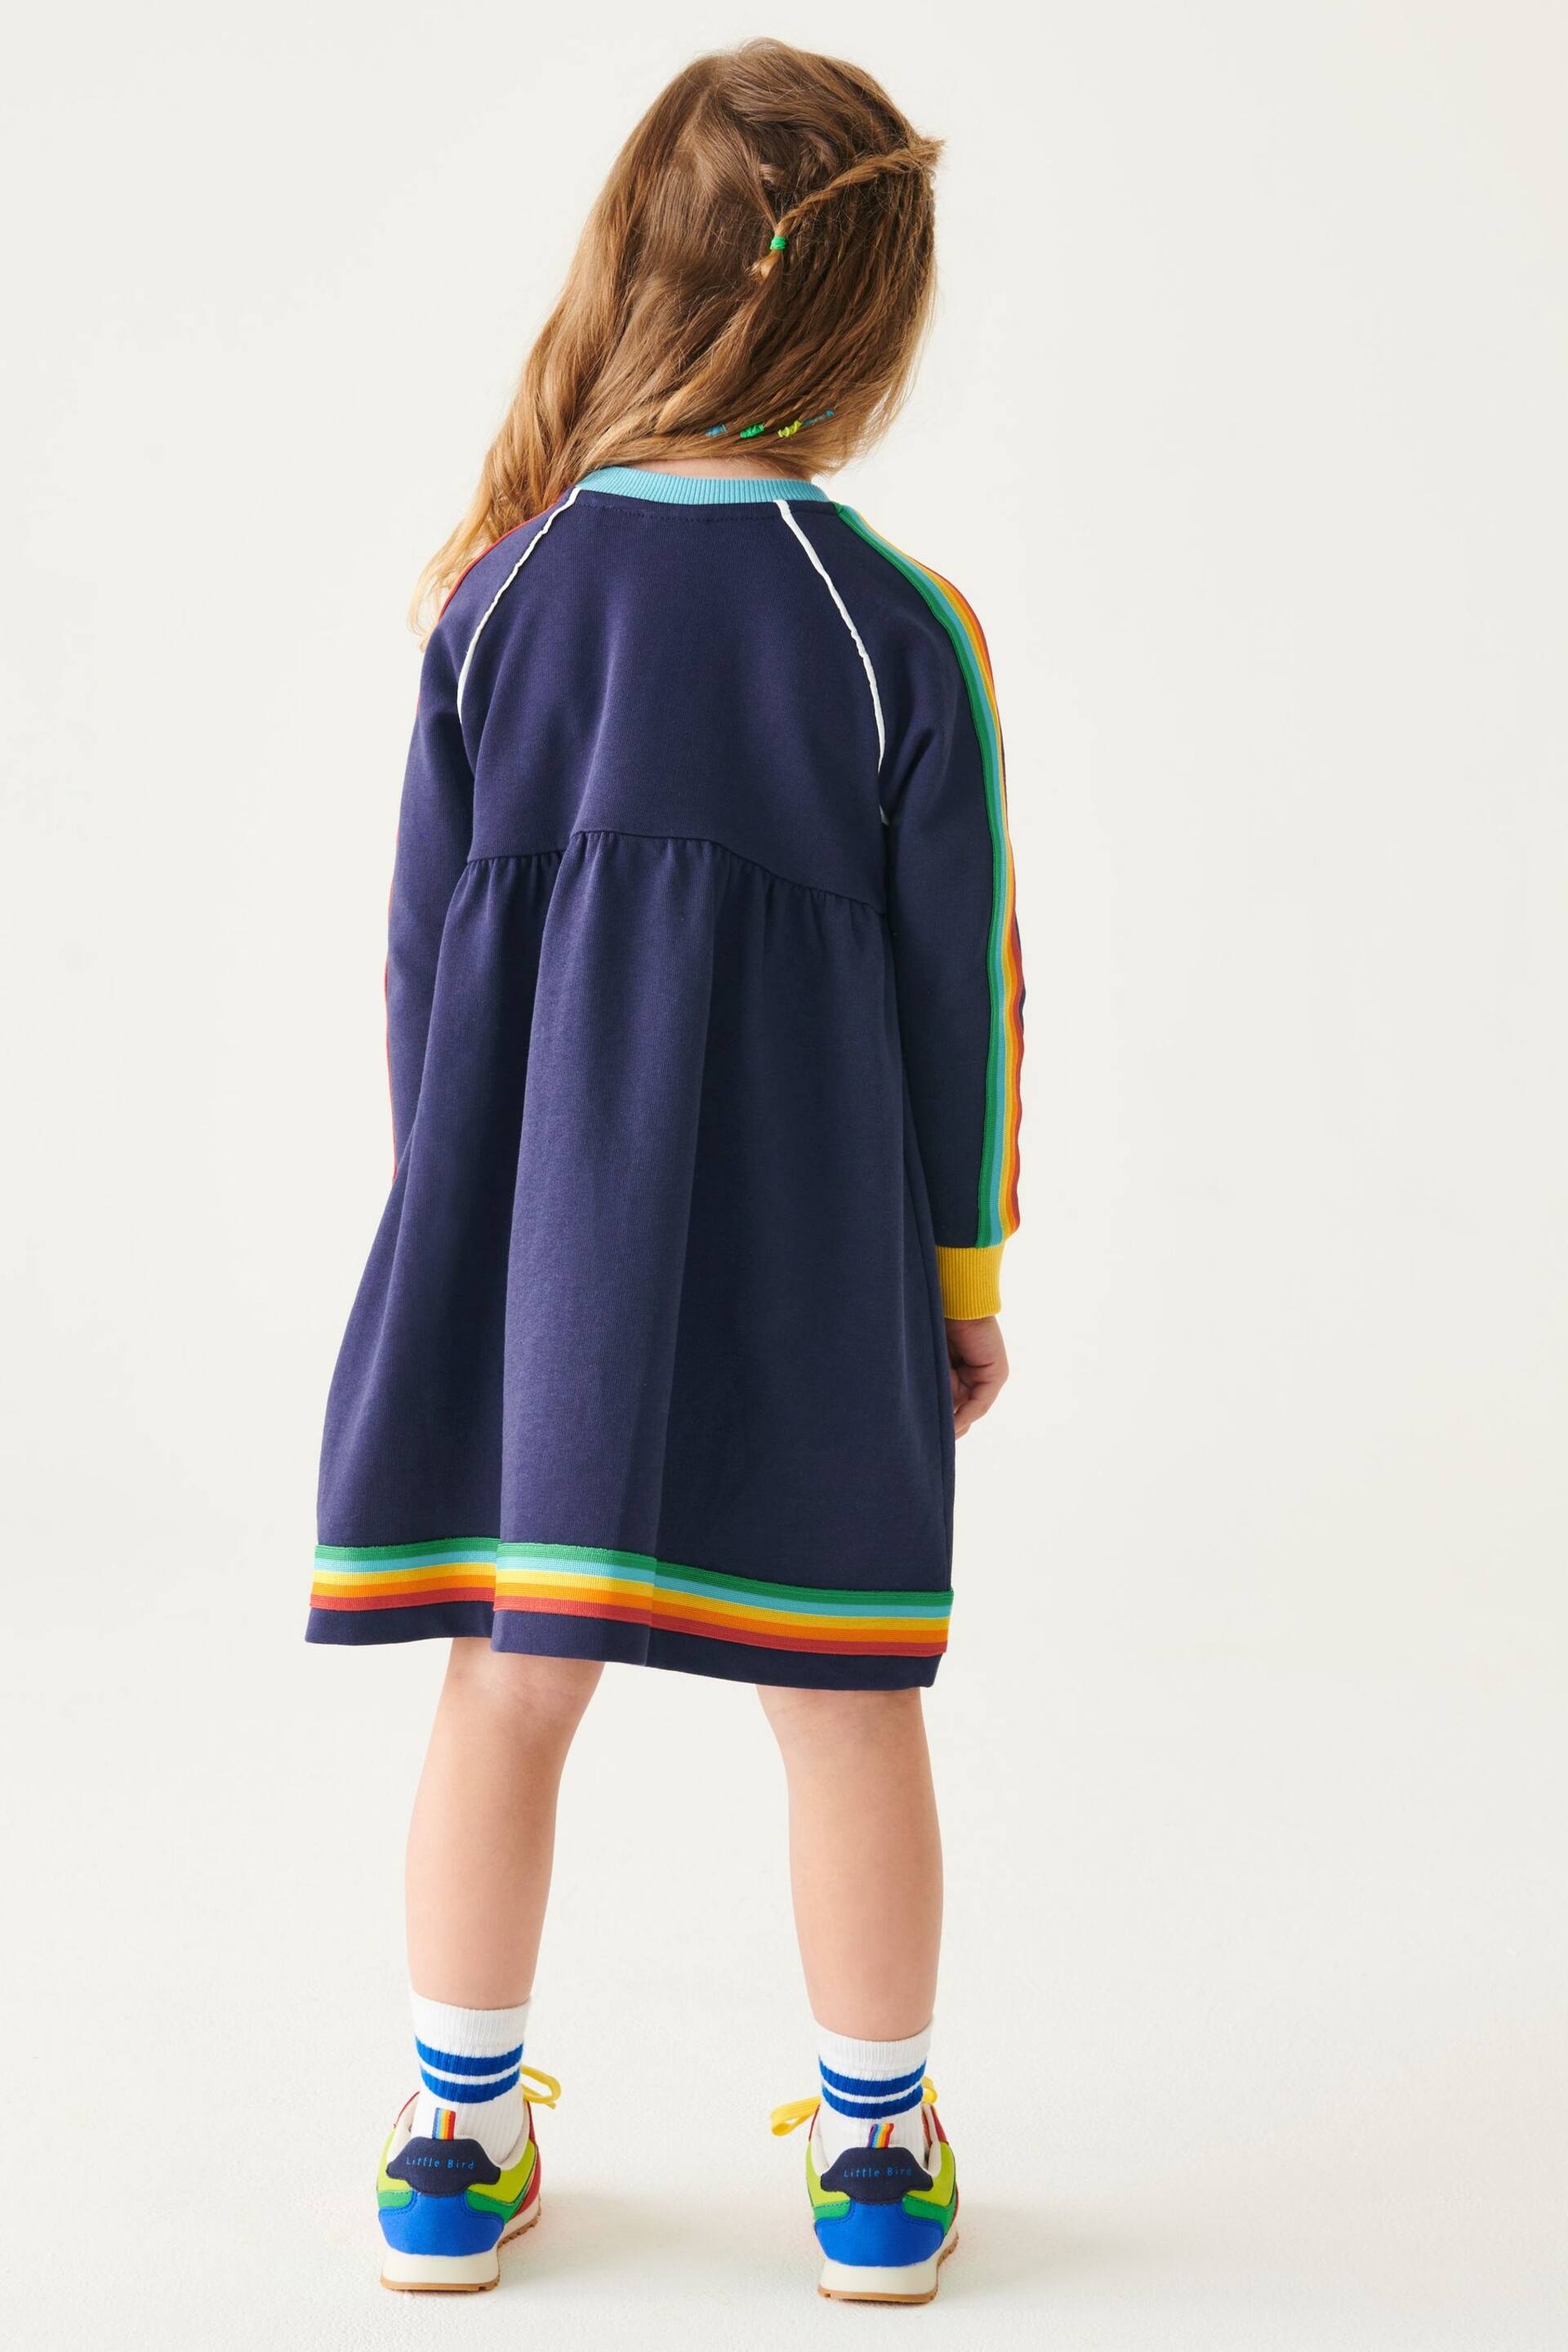 Little Bird by Jools Oliver Navy Little Bird by Jools Oliver Long Sleeve Rainbow Dress - Image 3 of 8